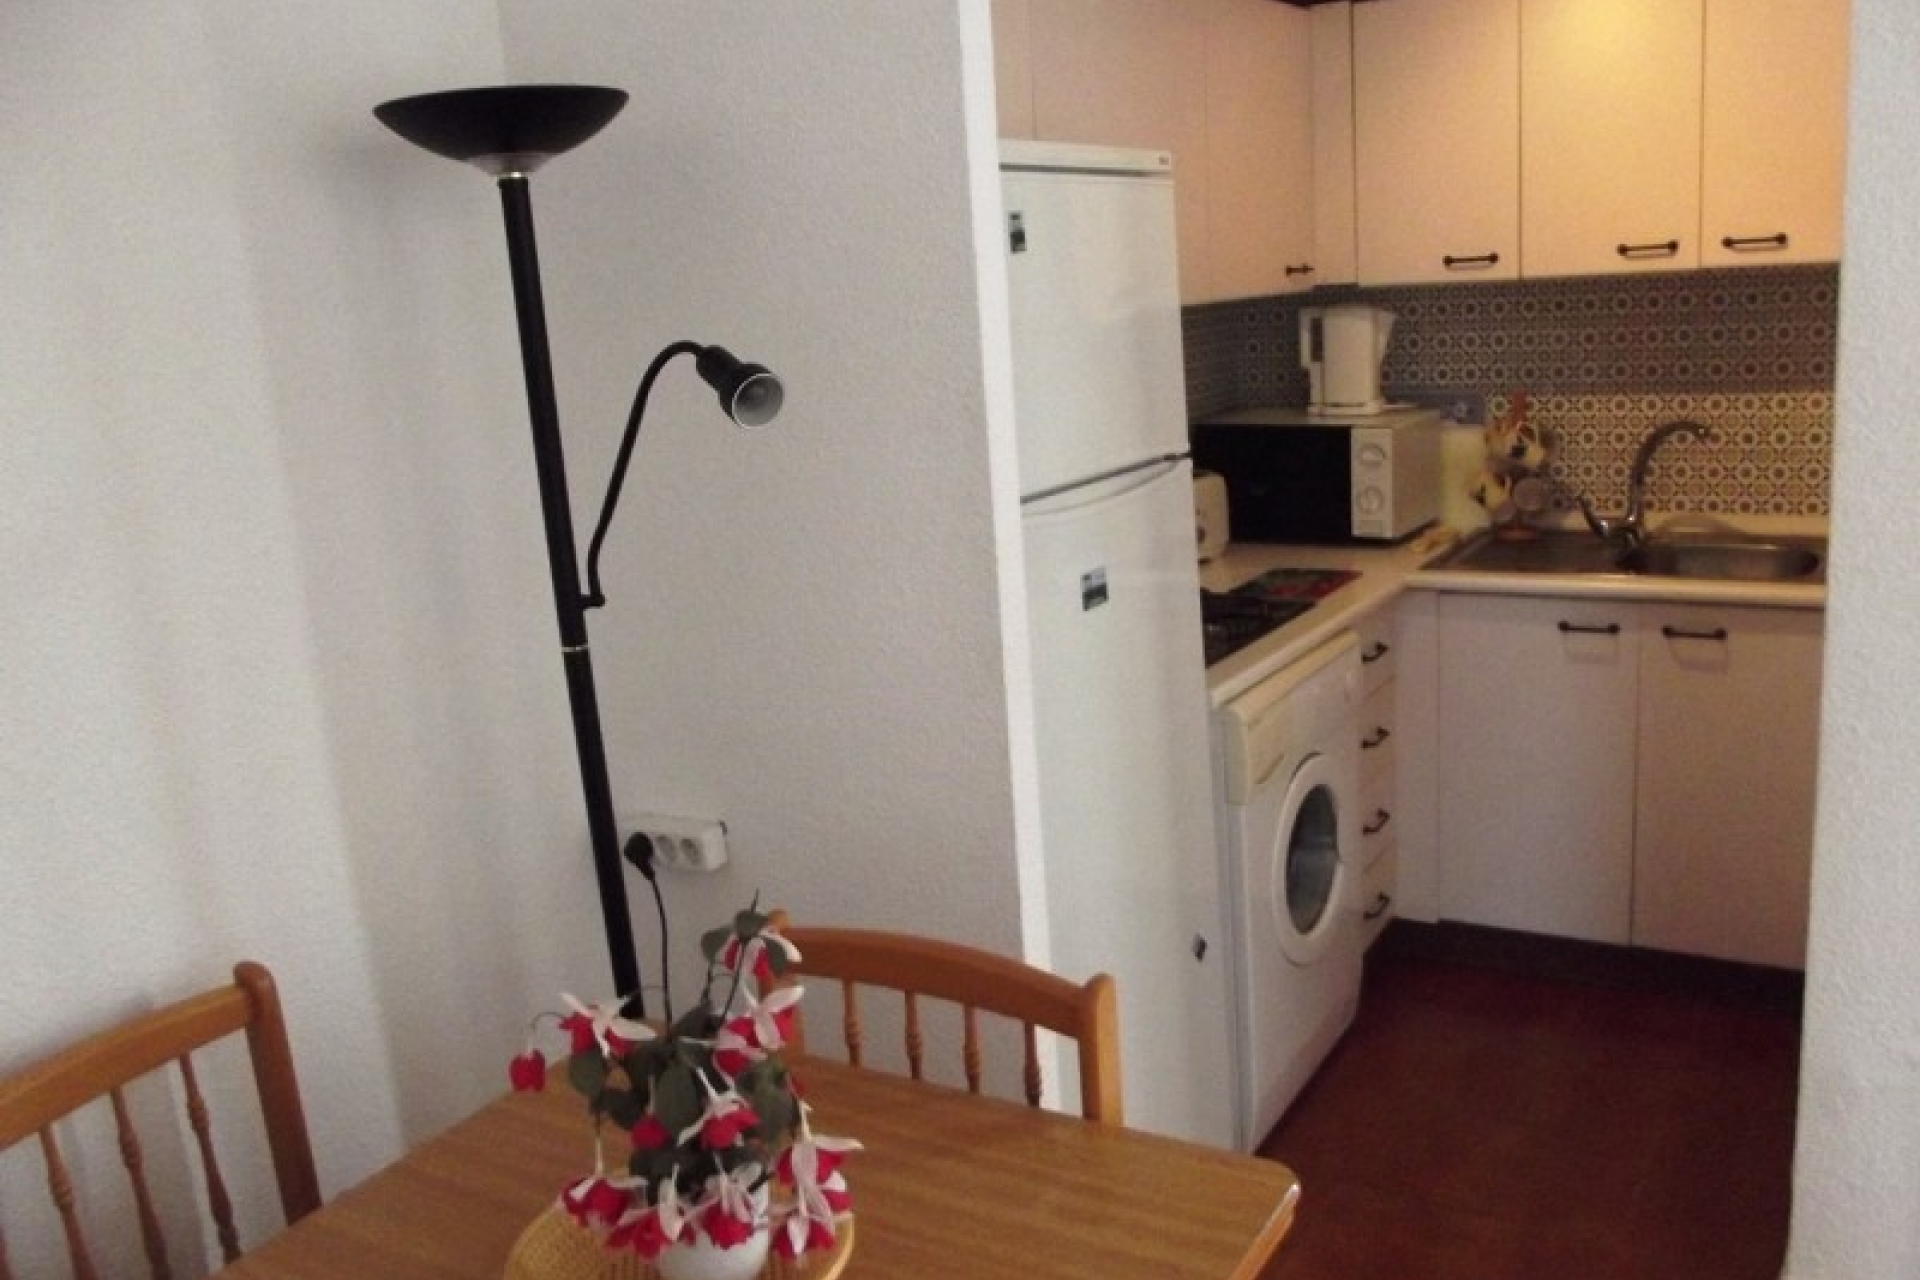 El Chapparal cheap bargain property for sale Torrevieja Spain